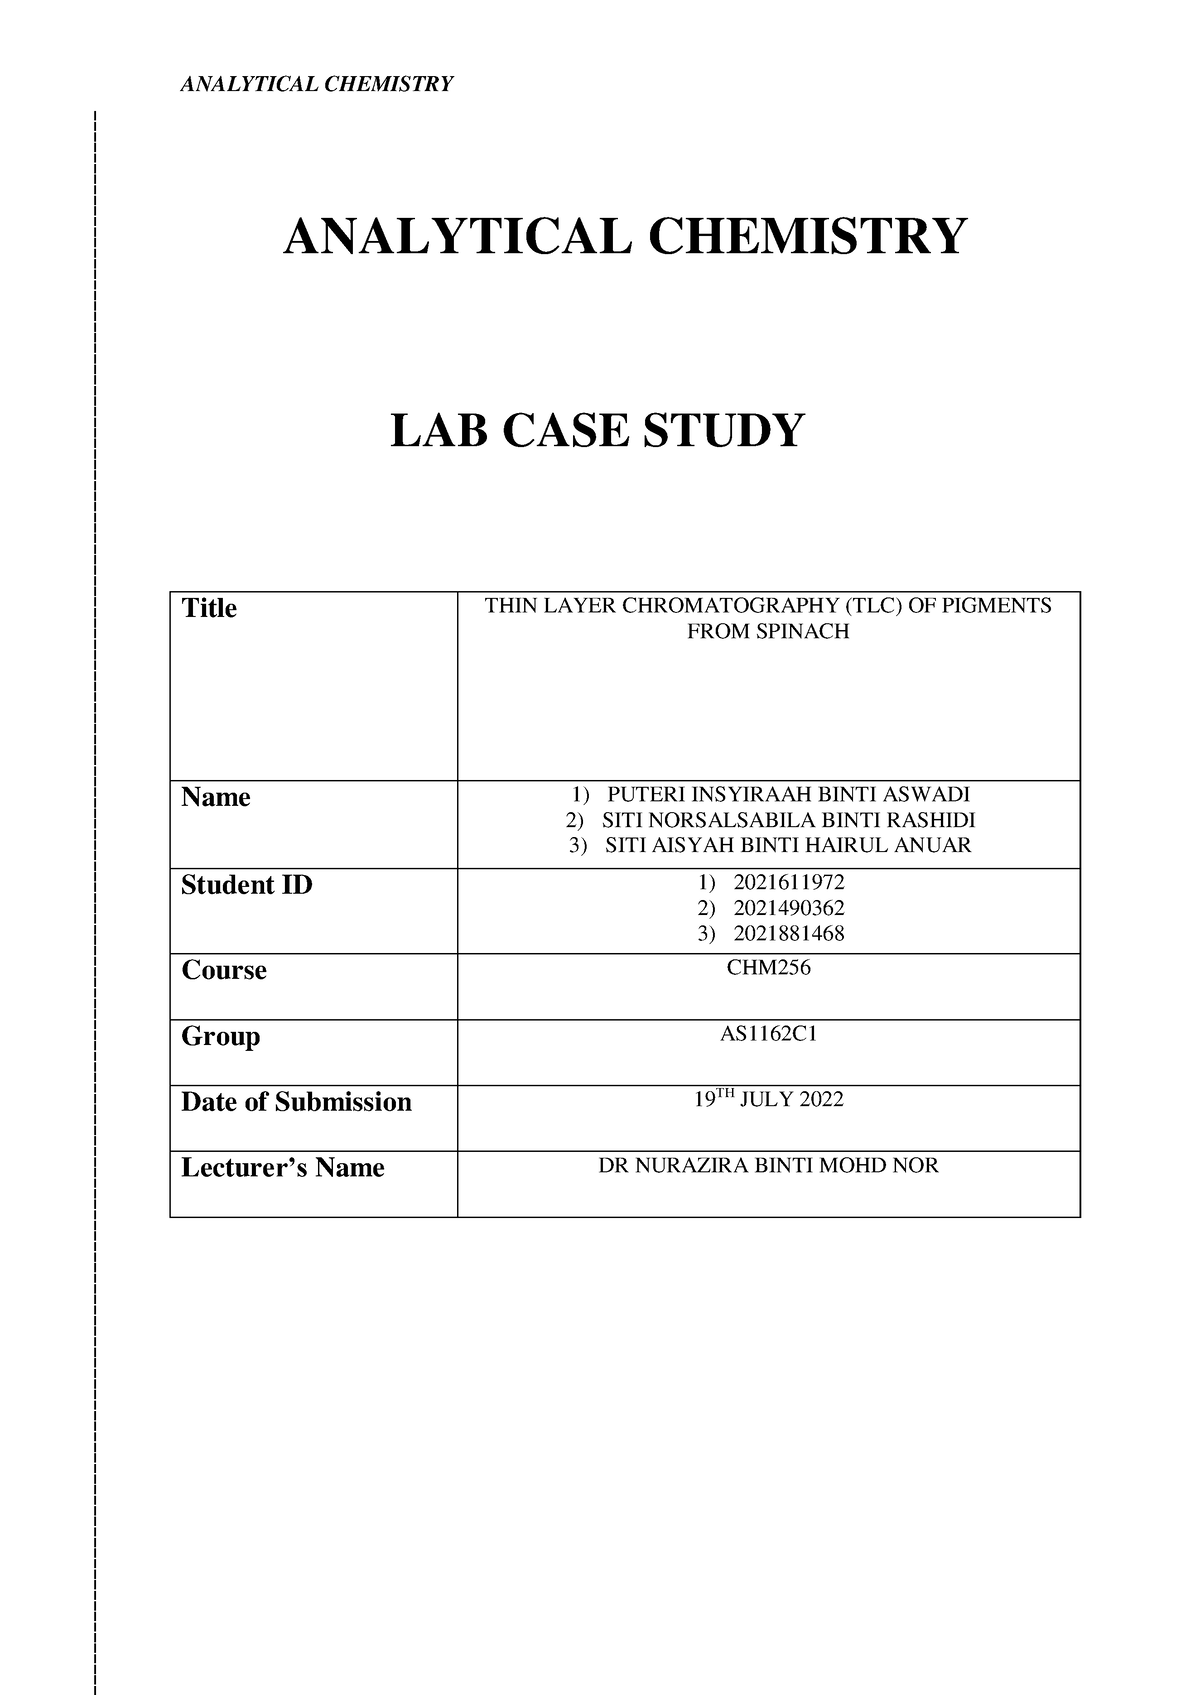 analytical chemistry case study example